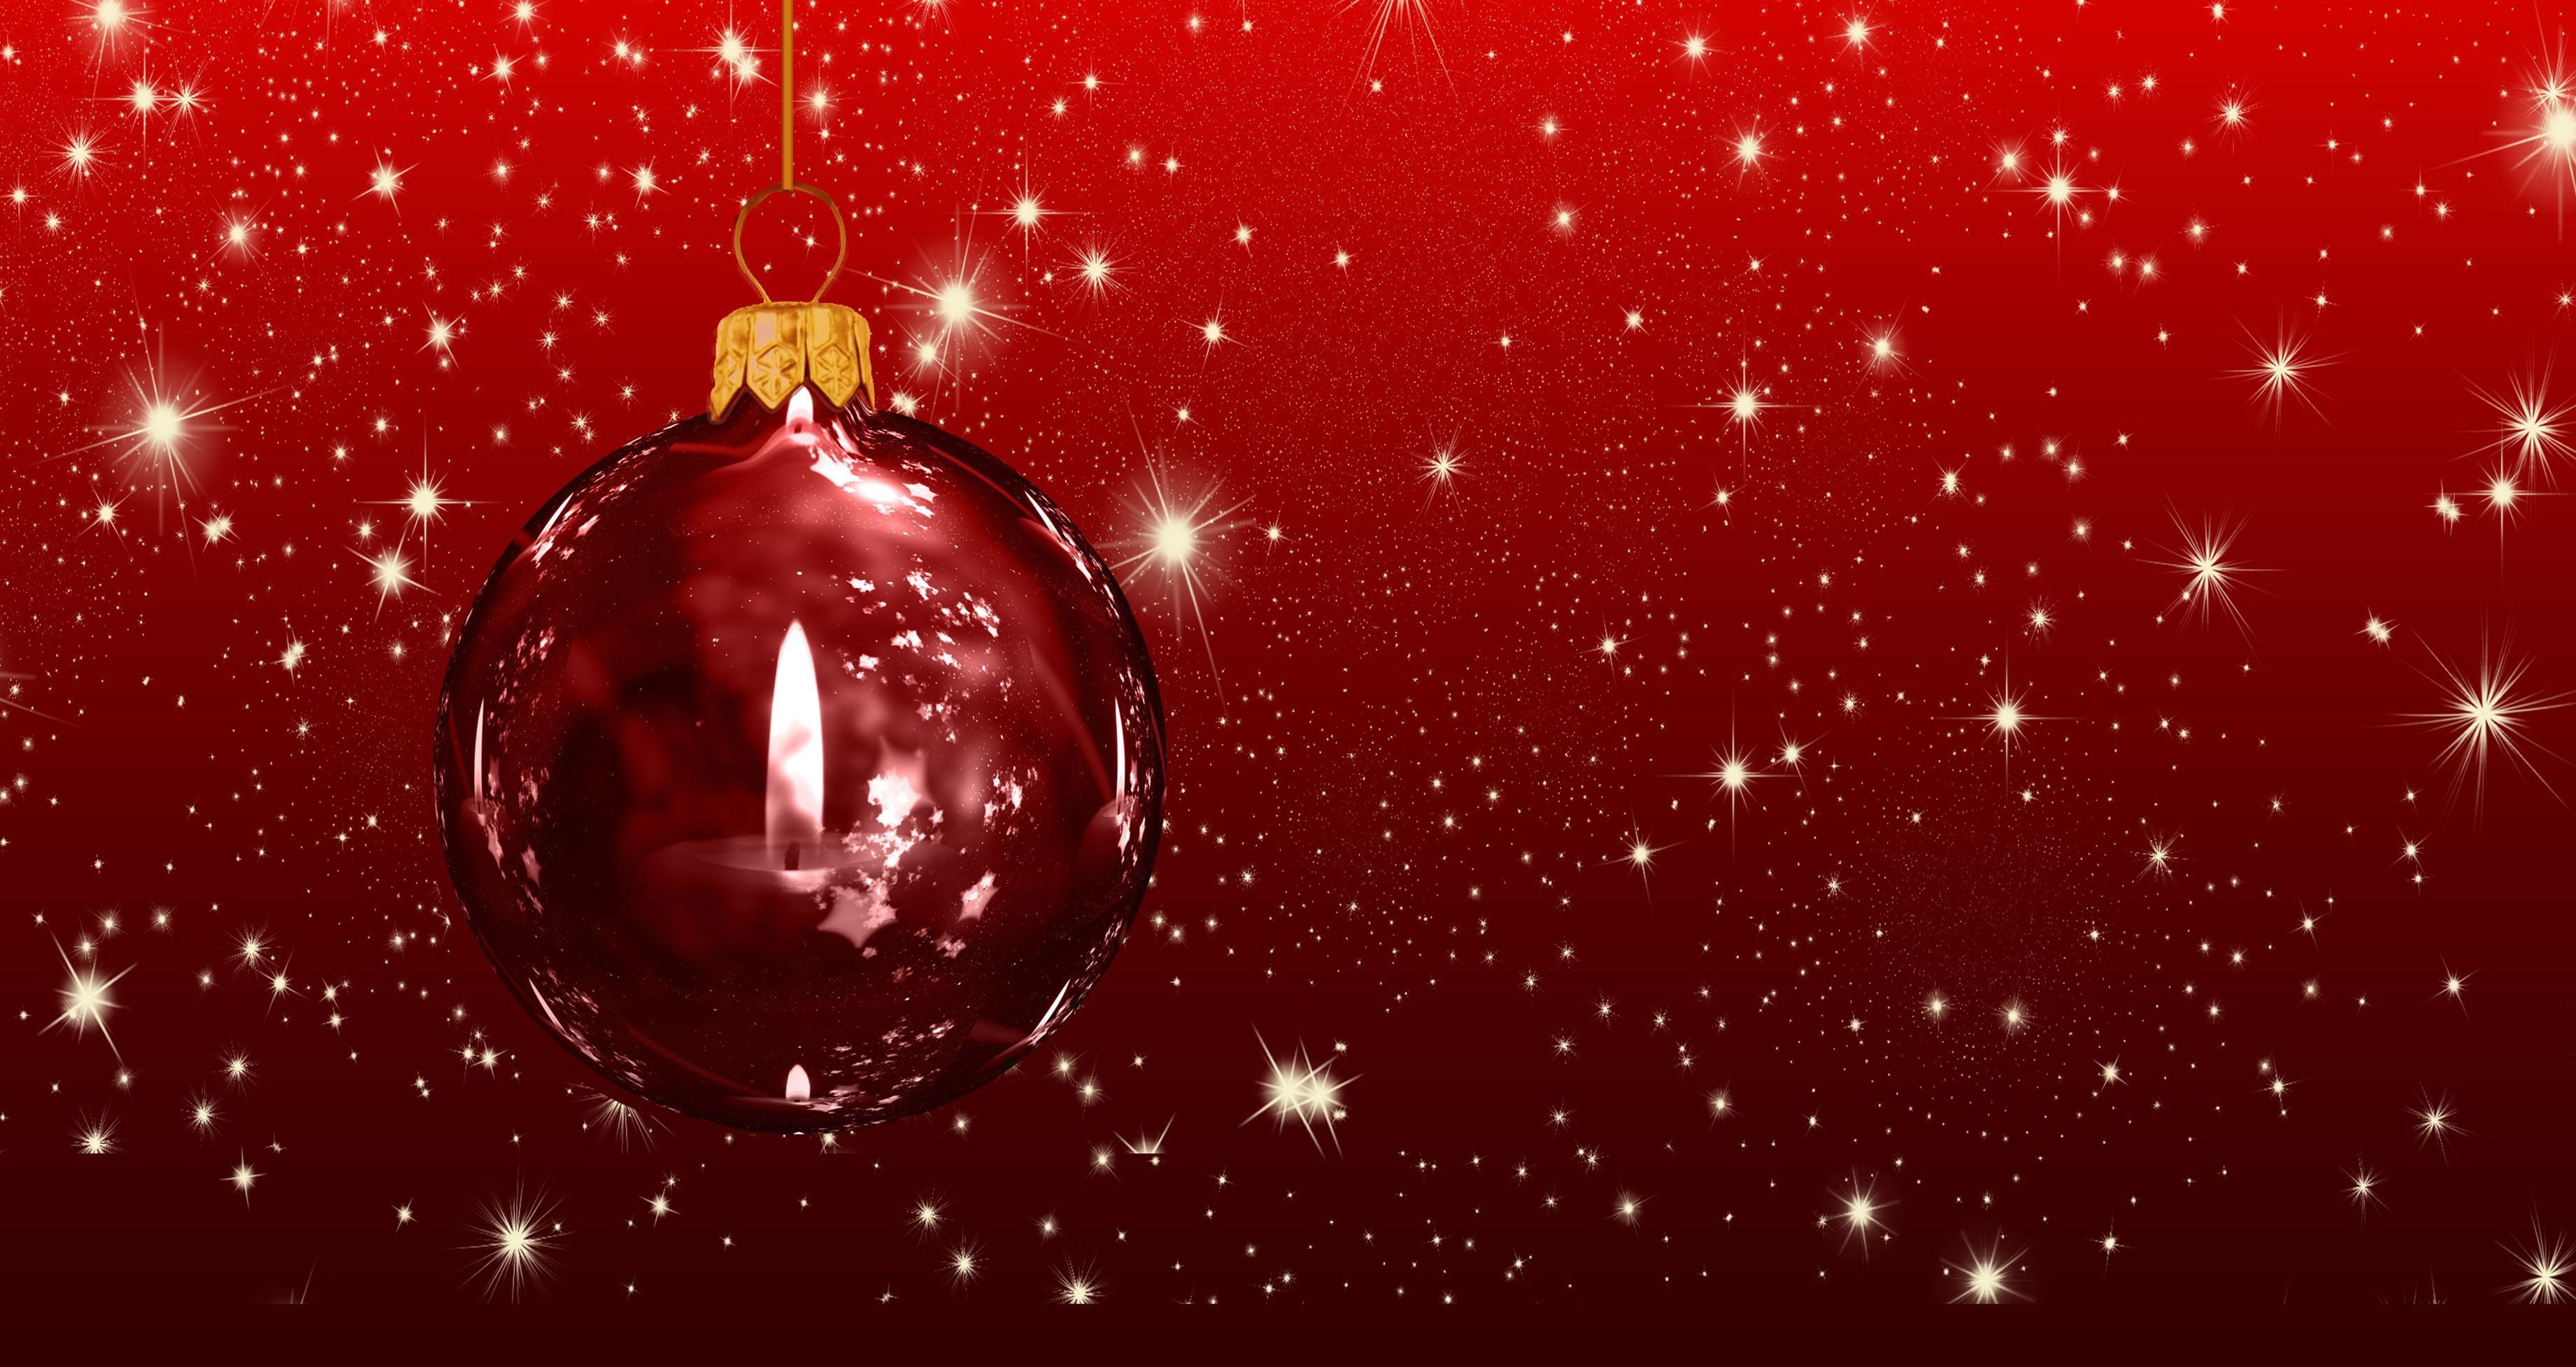 More Ball Decoration for a Free Christmas Wallpaper and Christmas Background Image